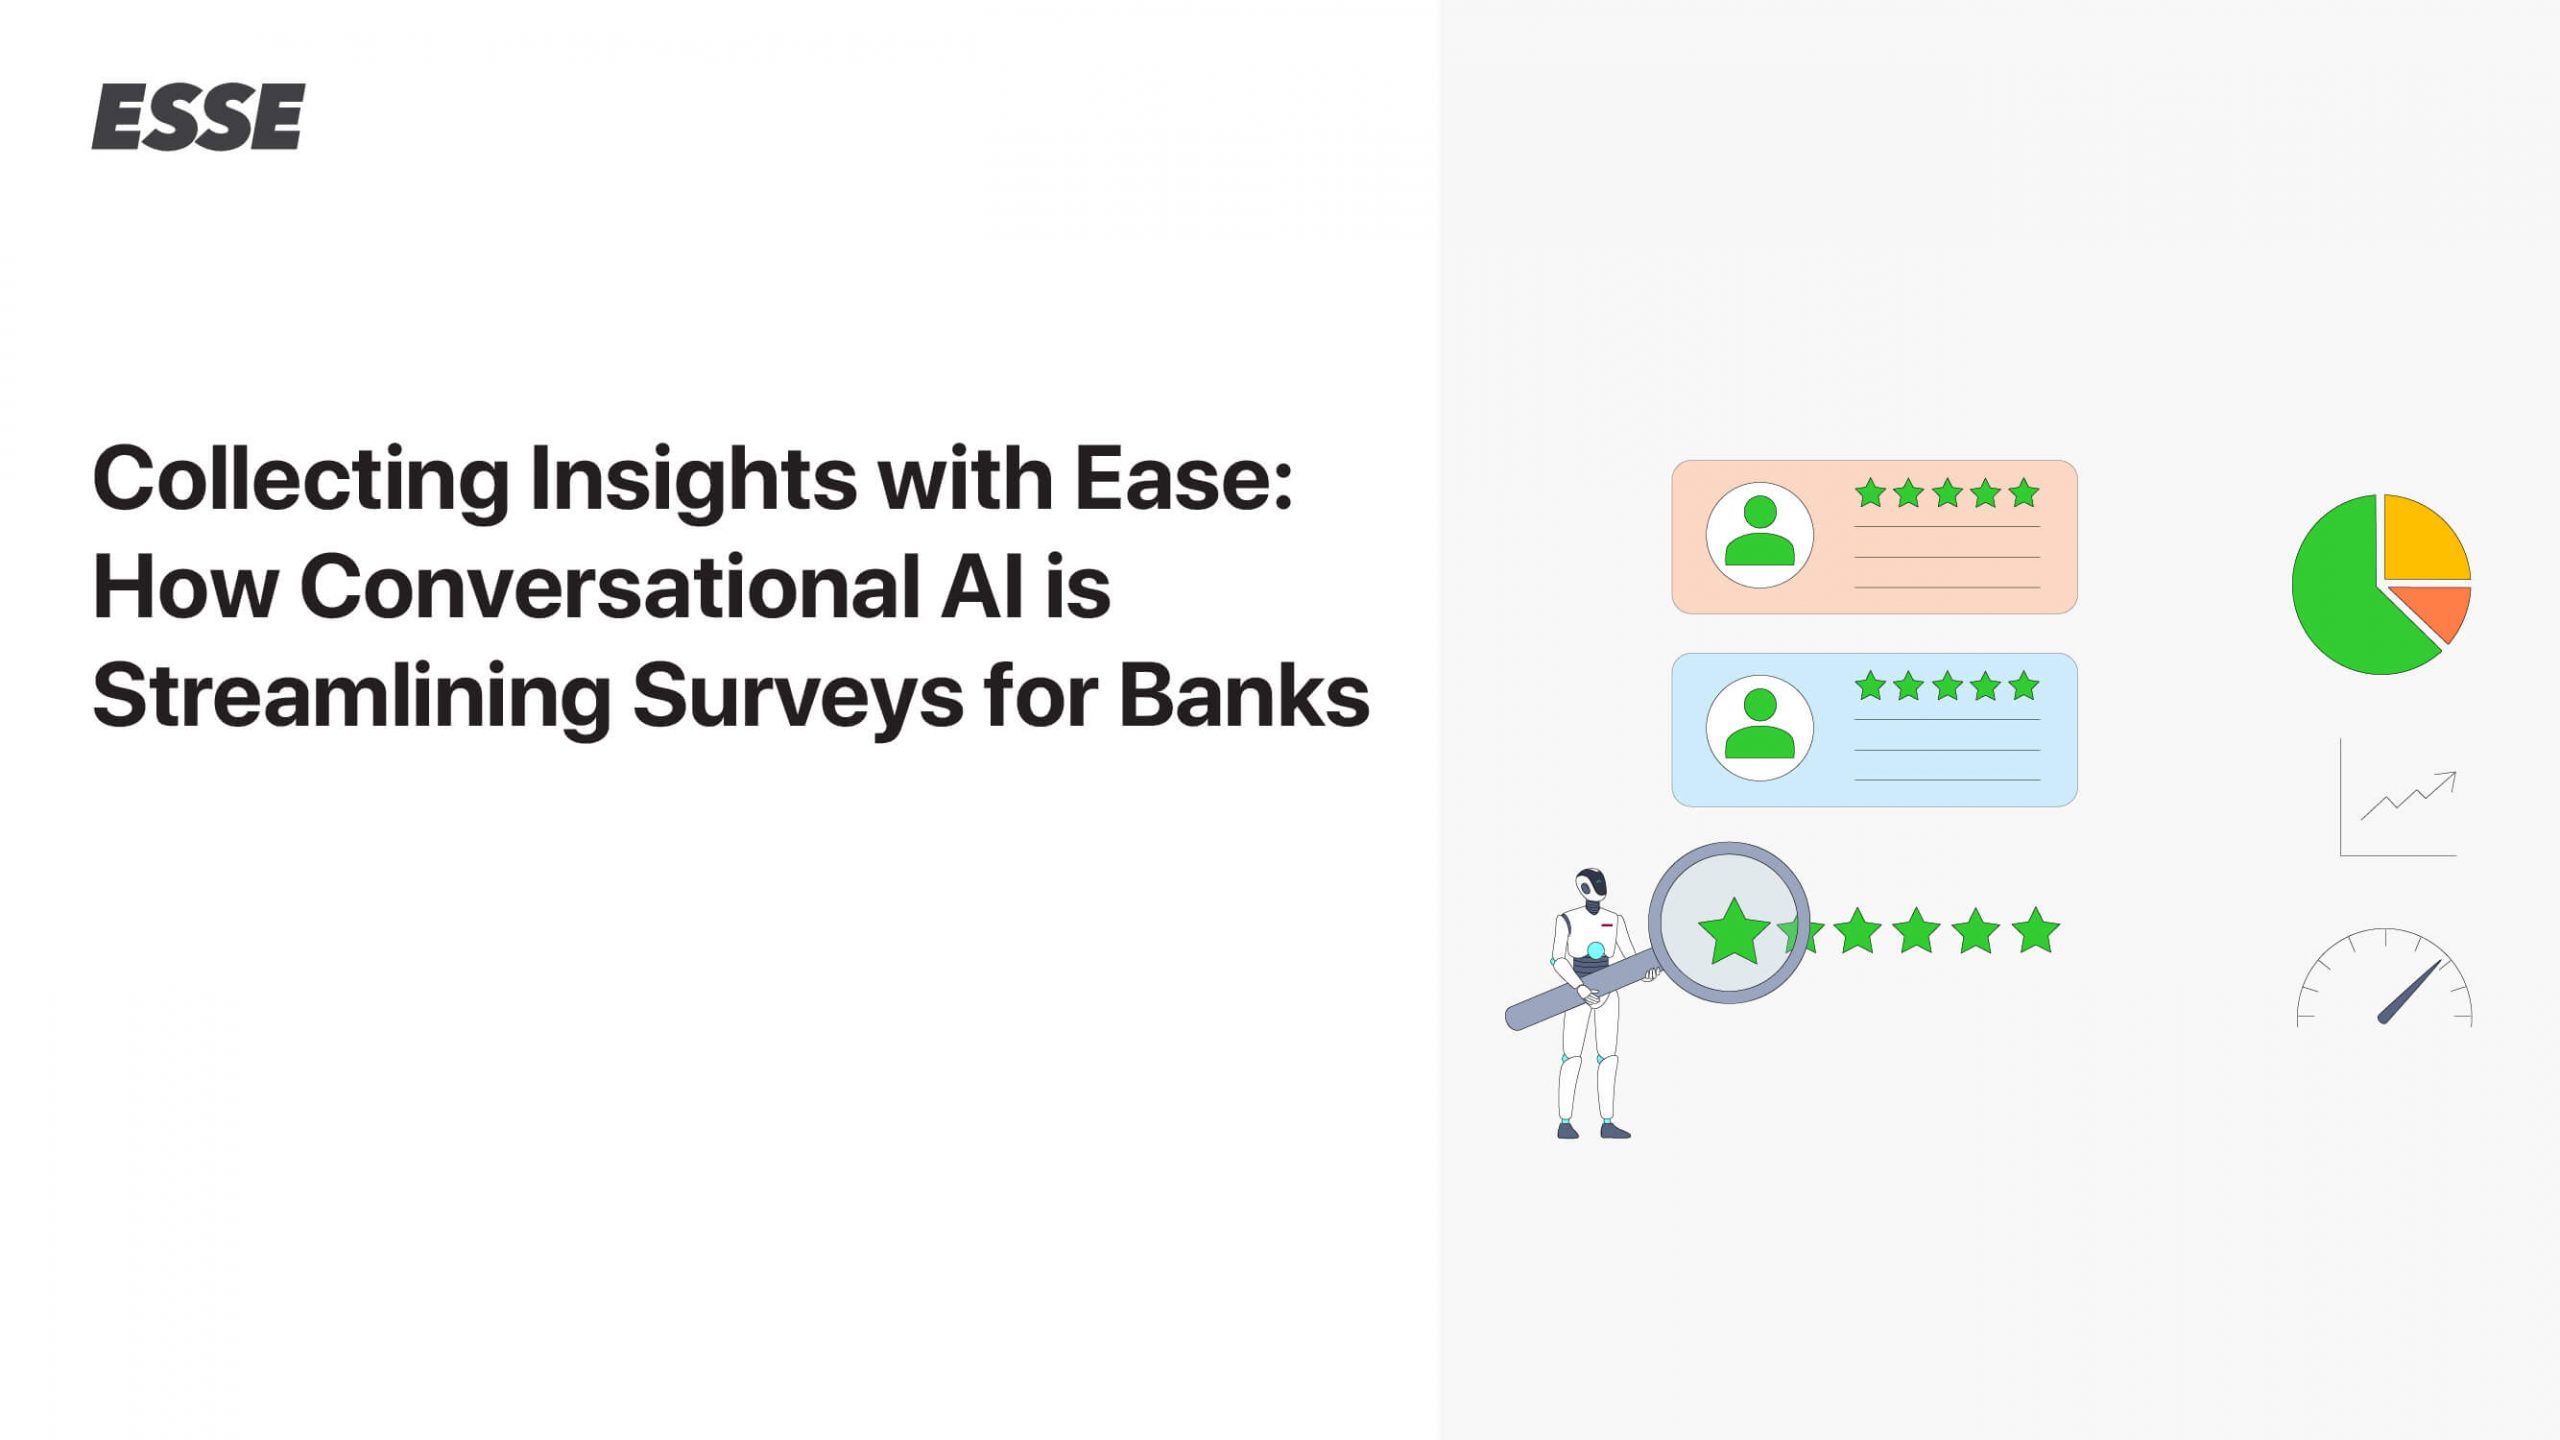 Collecting Insights with Ease: How Conversational AI is Streamlining Surveys for Banks